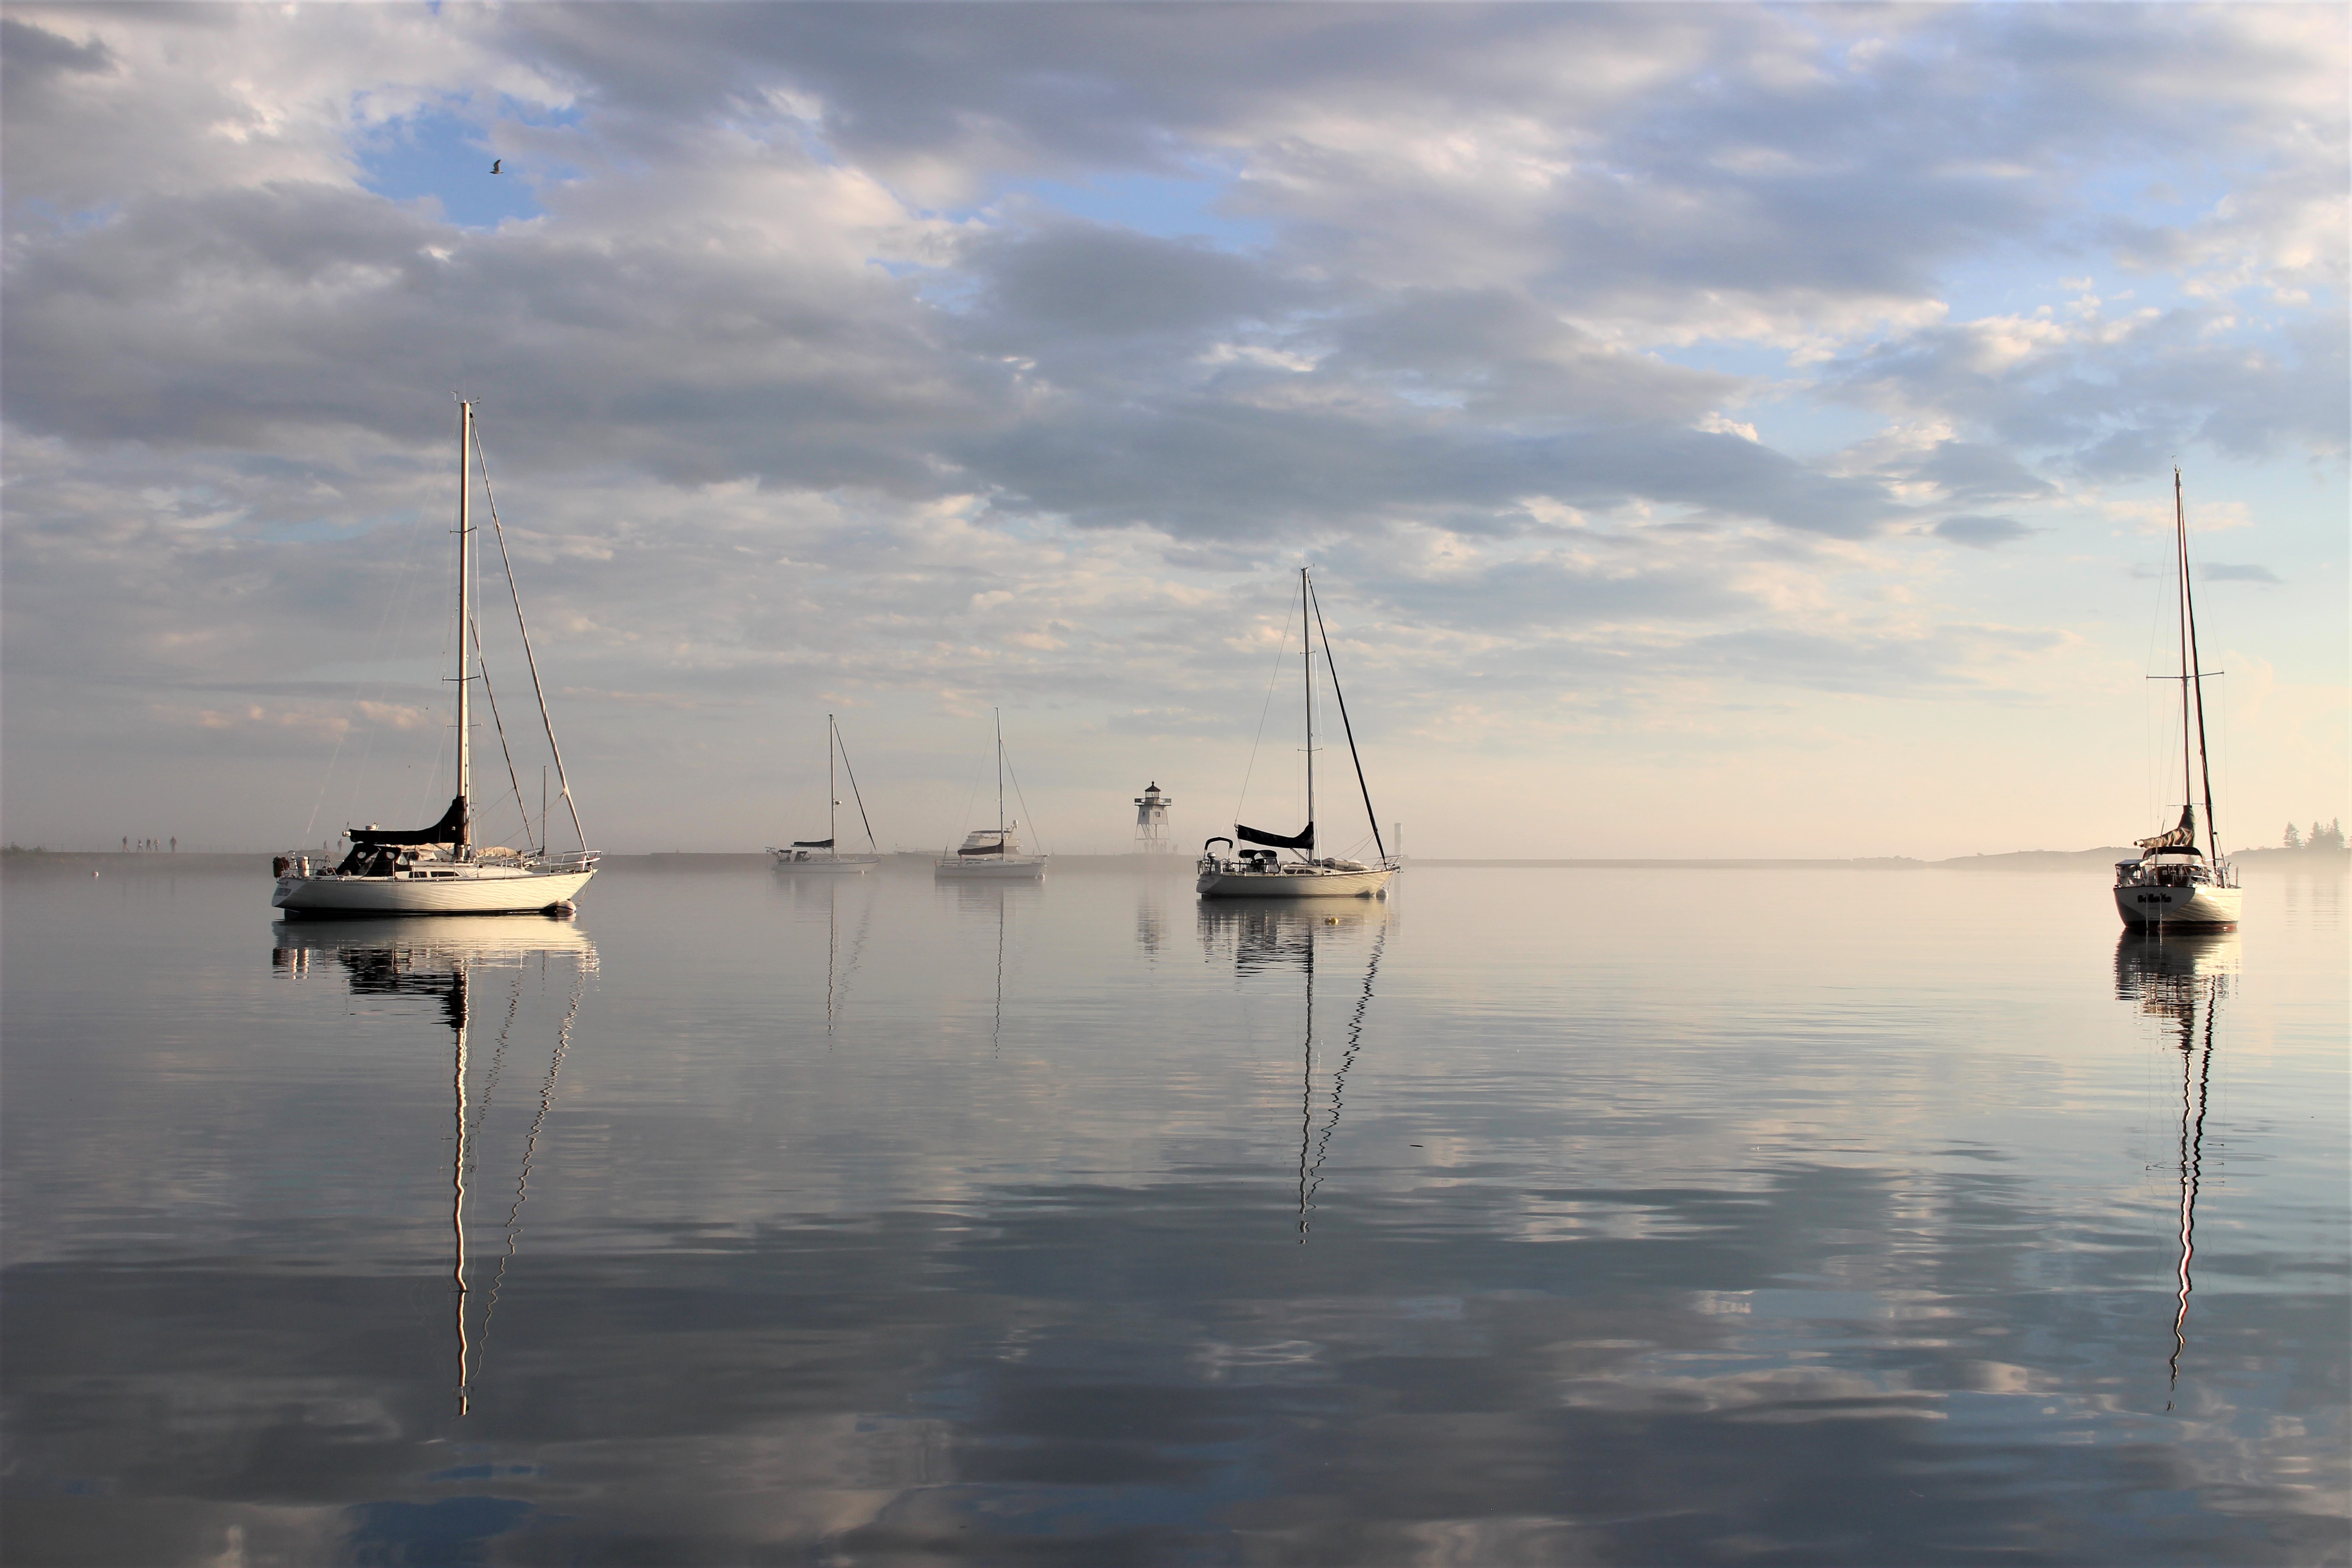 color photo of several boats on clear, smooth water with clouds and blue sky all reflected in the surface of the water